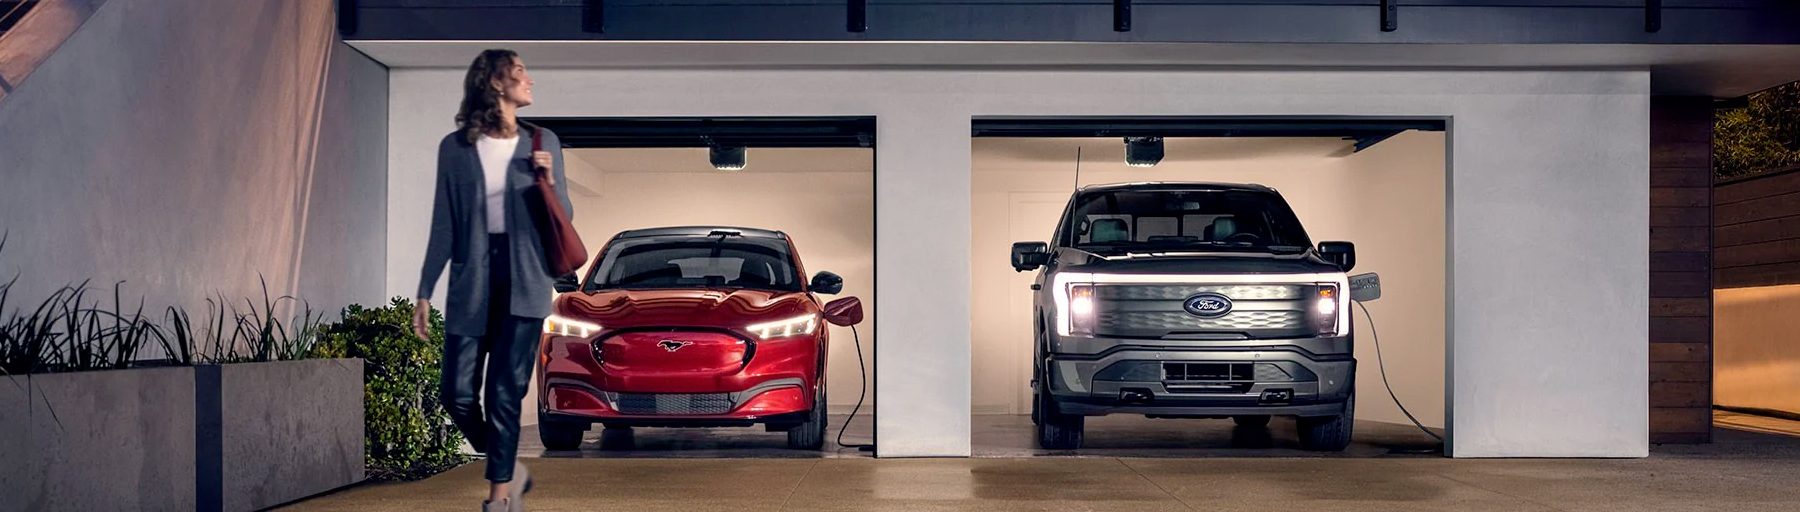 A 2022 Ford Mustang Mach-E® and a Ford F-150® Lightning are being charged in a garage at night near two people